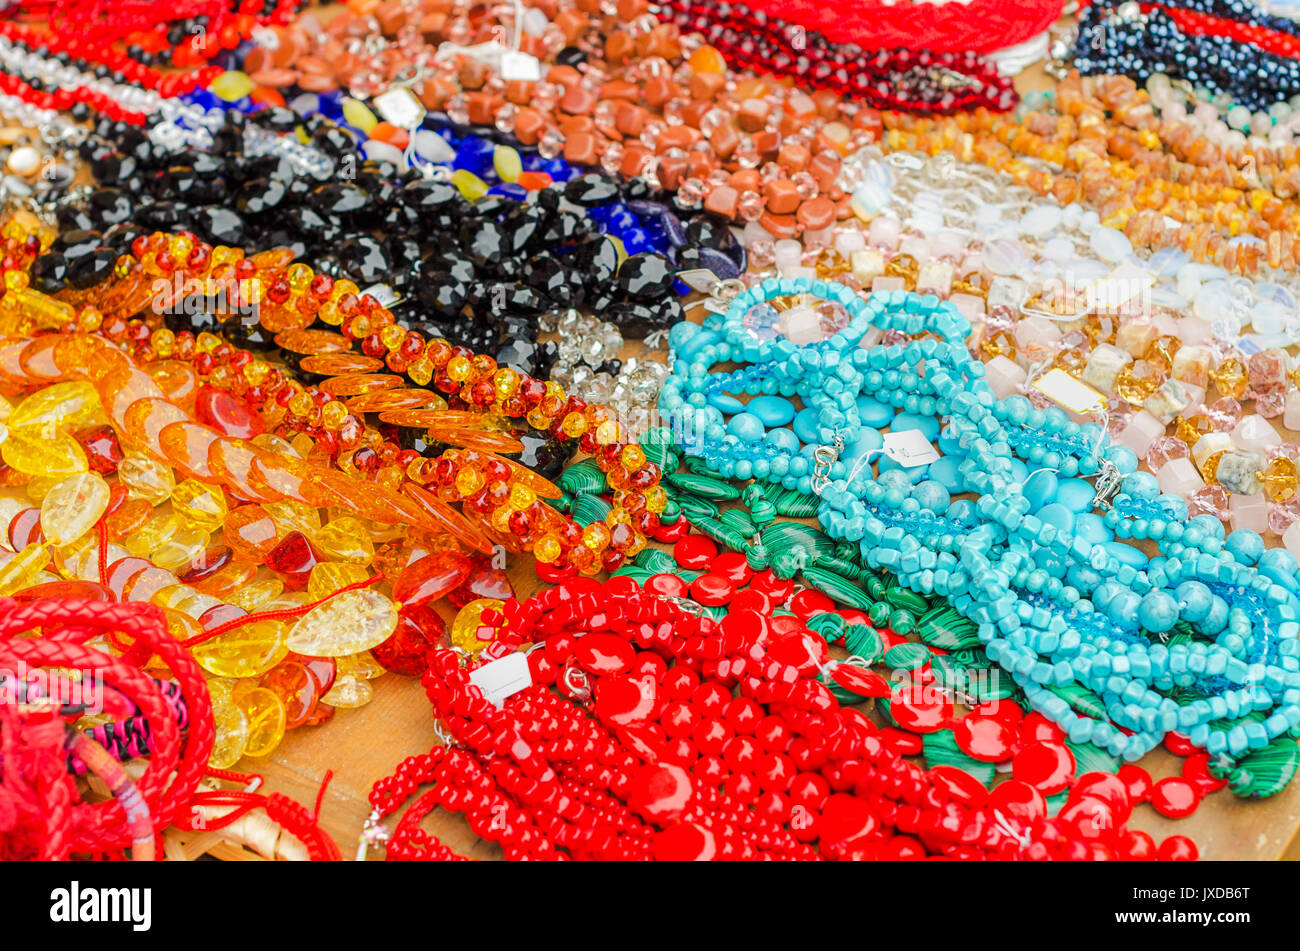 A pile of necklaces, bracelets and jewelry of assorted colors. Stock Photo